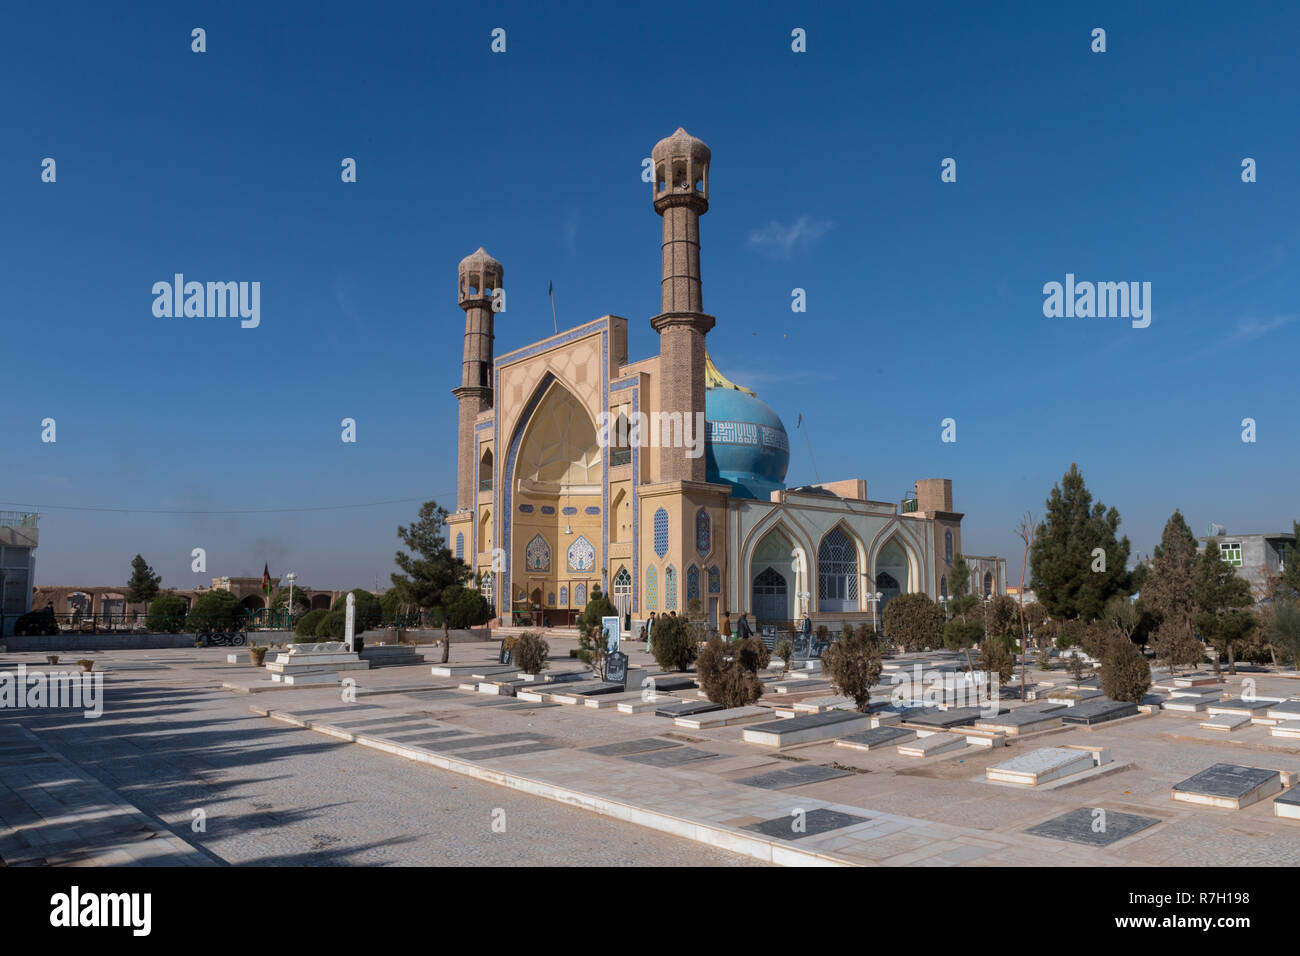 Shrine, Tomb Of Sultan Agha, Herat, Herat Province, Afghanistan Stock Photo